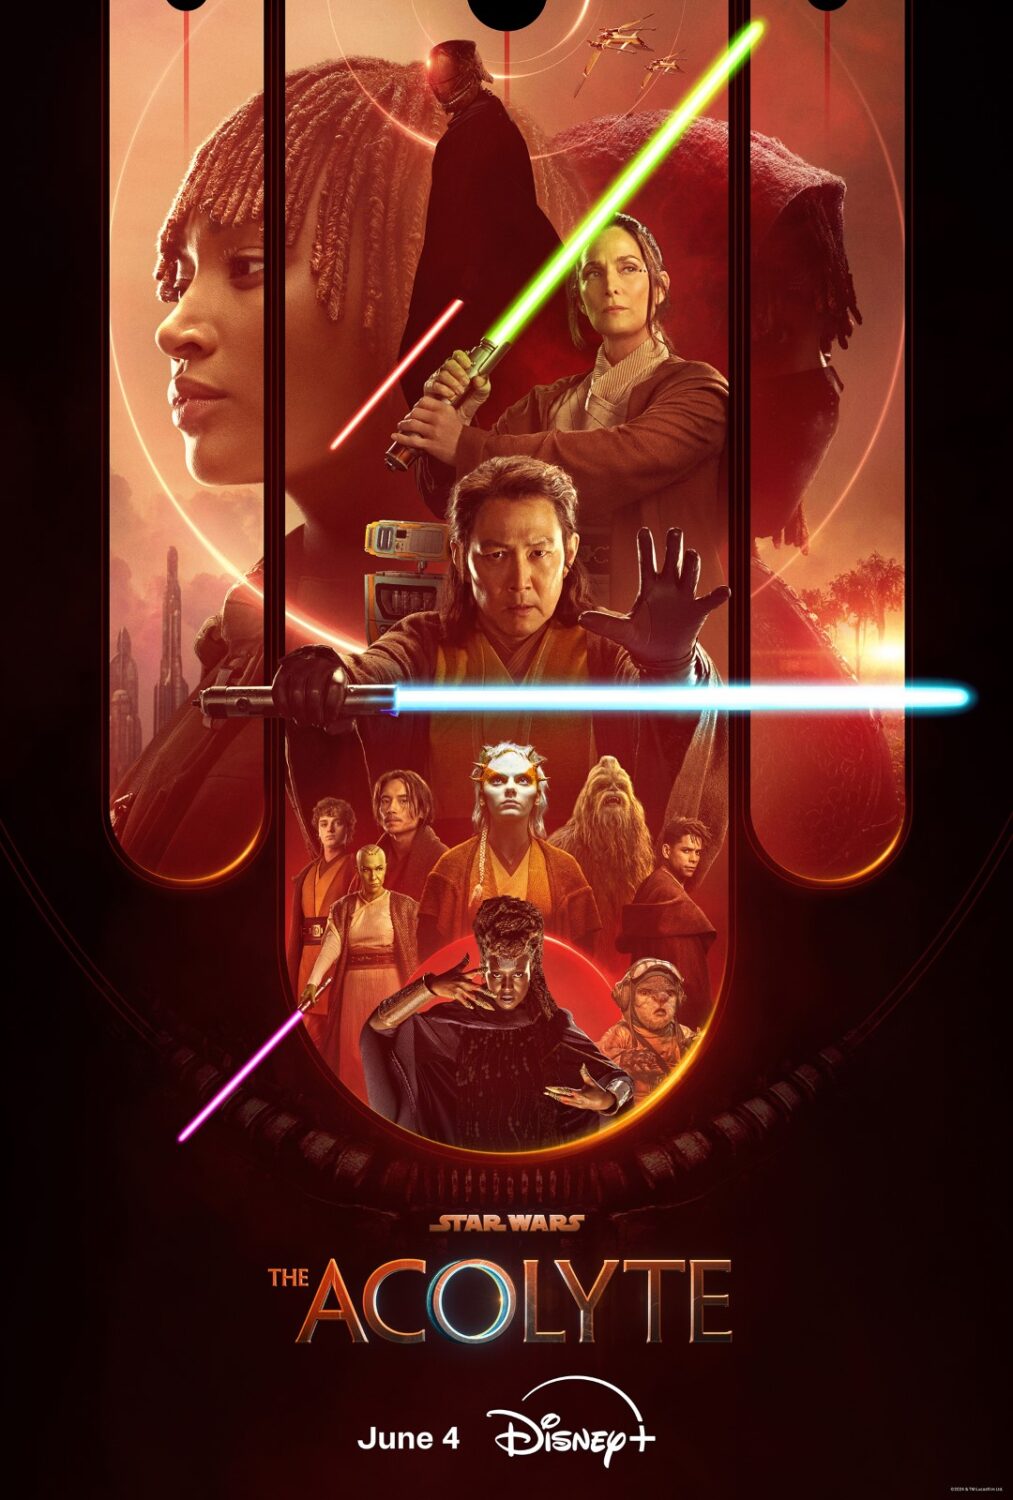 Disney+ launches 'The Acolyte' trailer on Star Wars Day